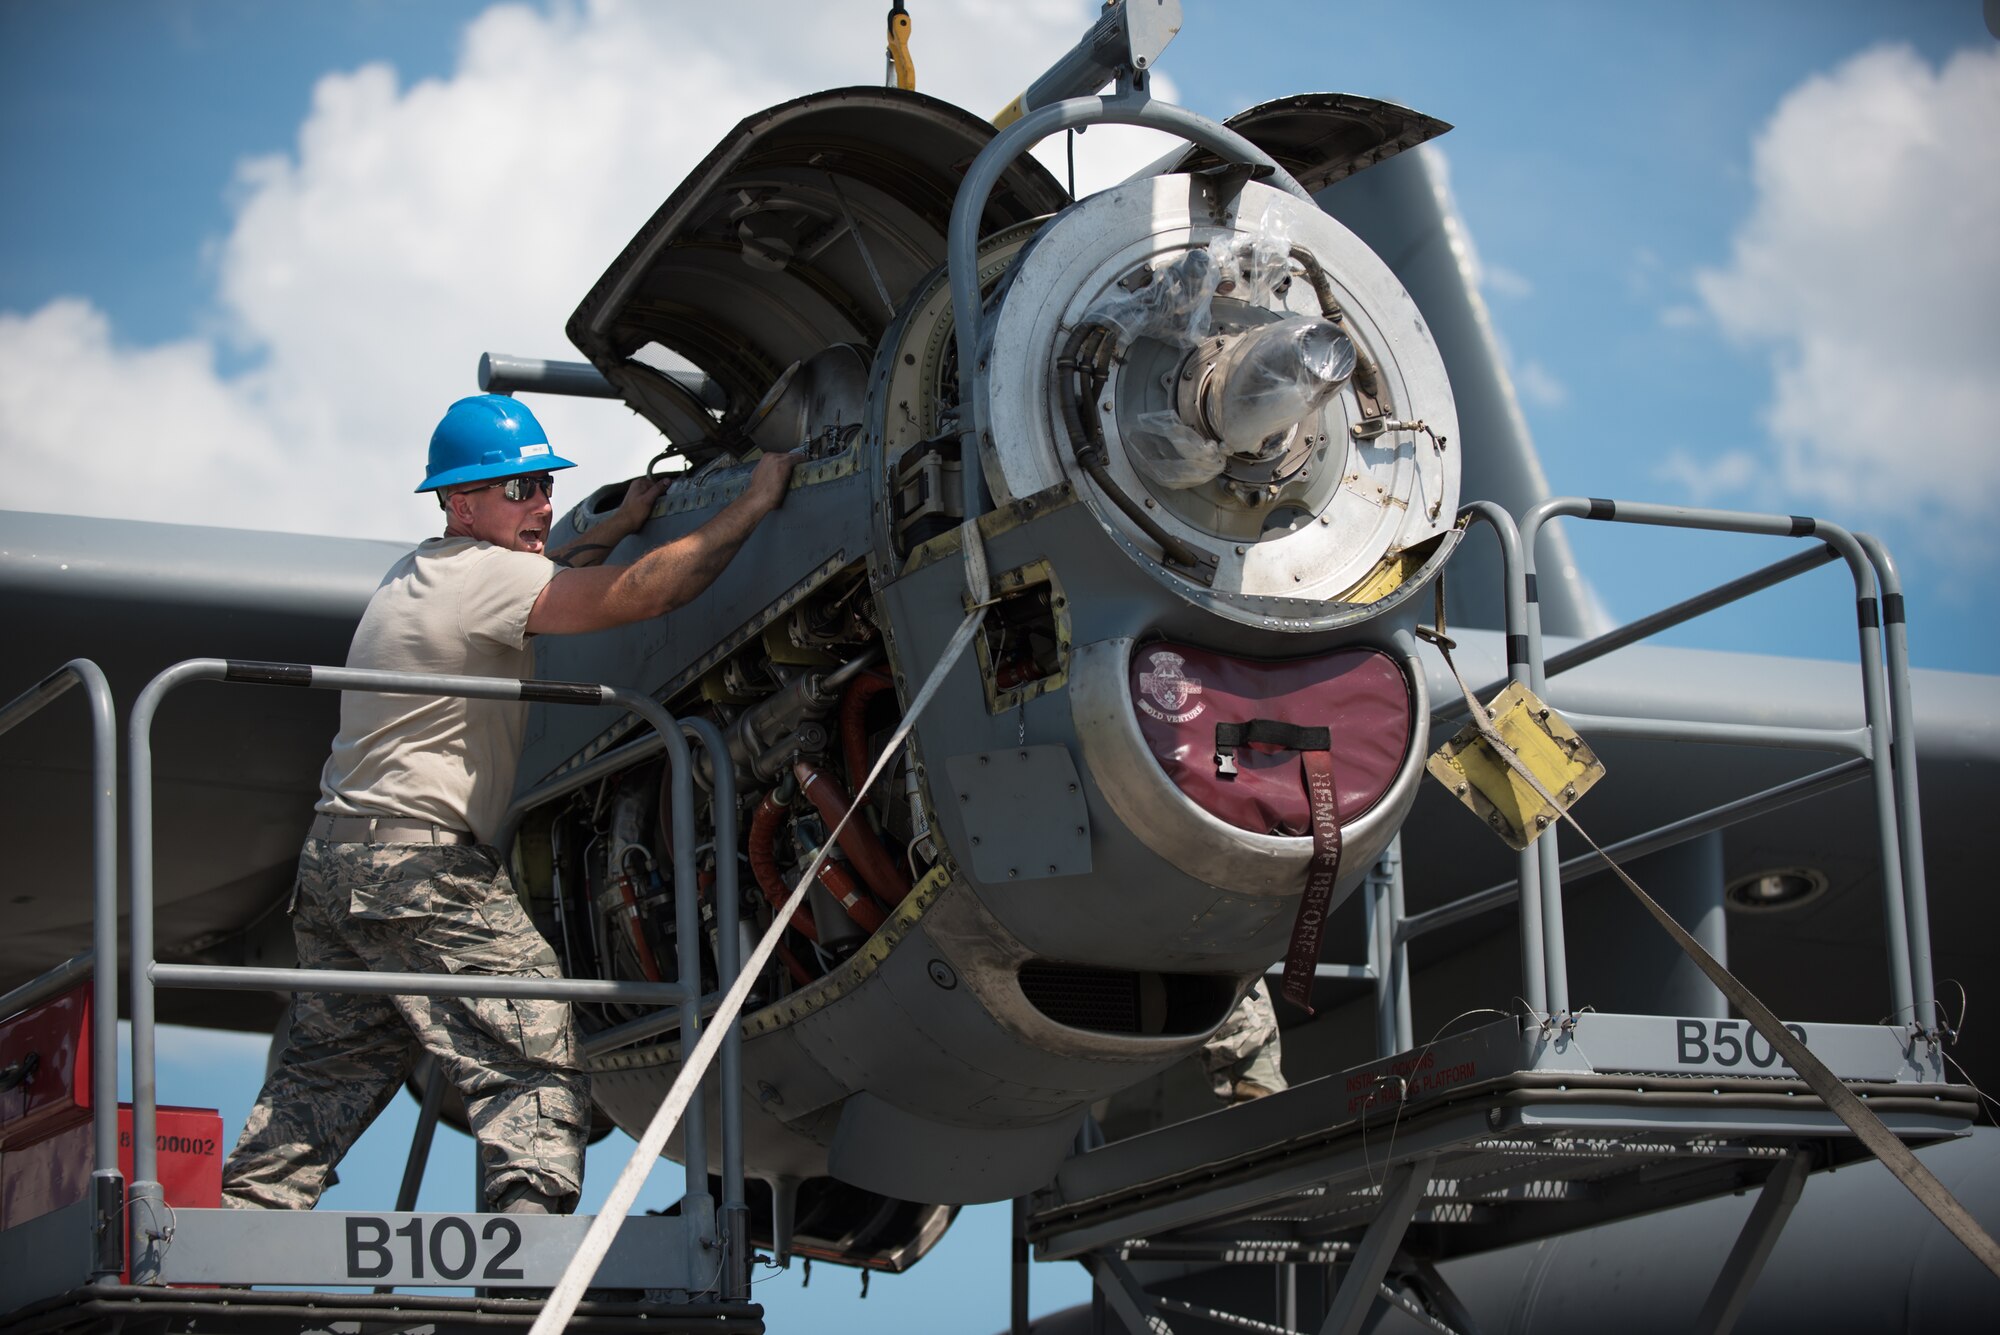 U.S. Air Force Staff Sgt. Michael Marks, a propulsion mechanic from the Kentucky Air National Guard’s 123rd Airlift Wing, removes an engine from a C-130 Hercules aircraft at the Air National Guard’s Air Dominance Center in Savannah, Ga., June 15, 2016. Marks is attending Maintenance University here, a weeklong course designed to provide intensive instruction in aircraft maintenance. Now in its eighth year, Maintenance University is sponsored by the 123rd Airlift Wing. (U.S. Air National Guard photo by Lt. Col. Dale Greer)